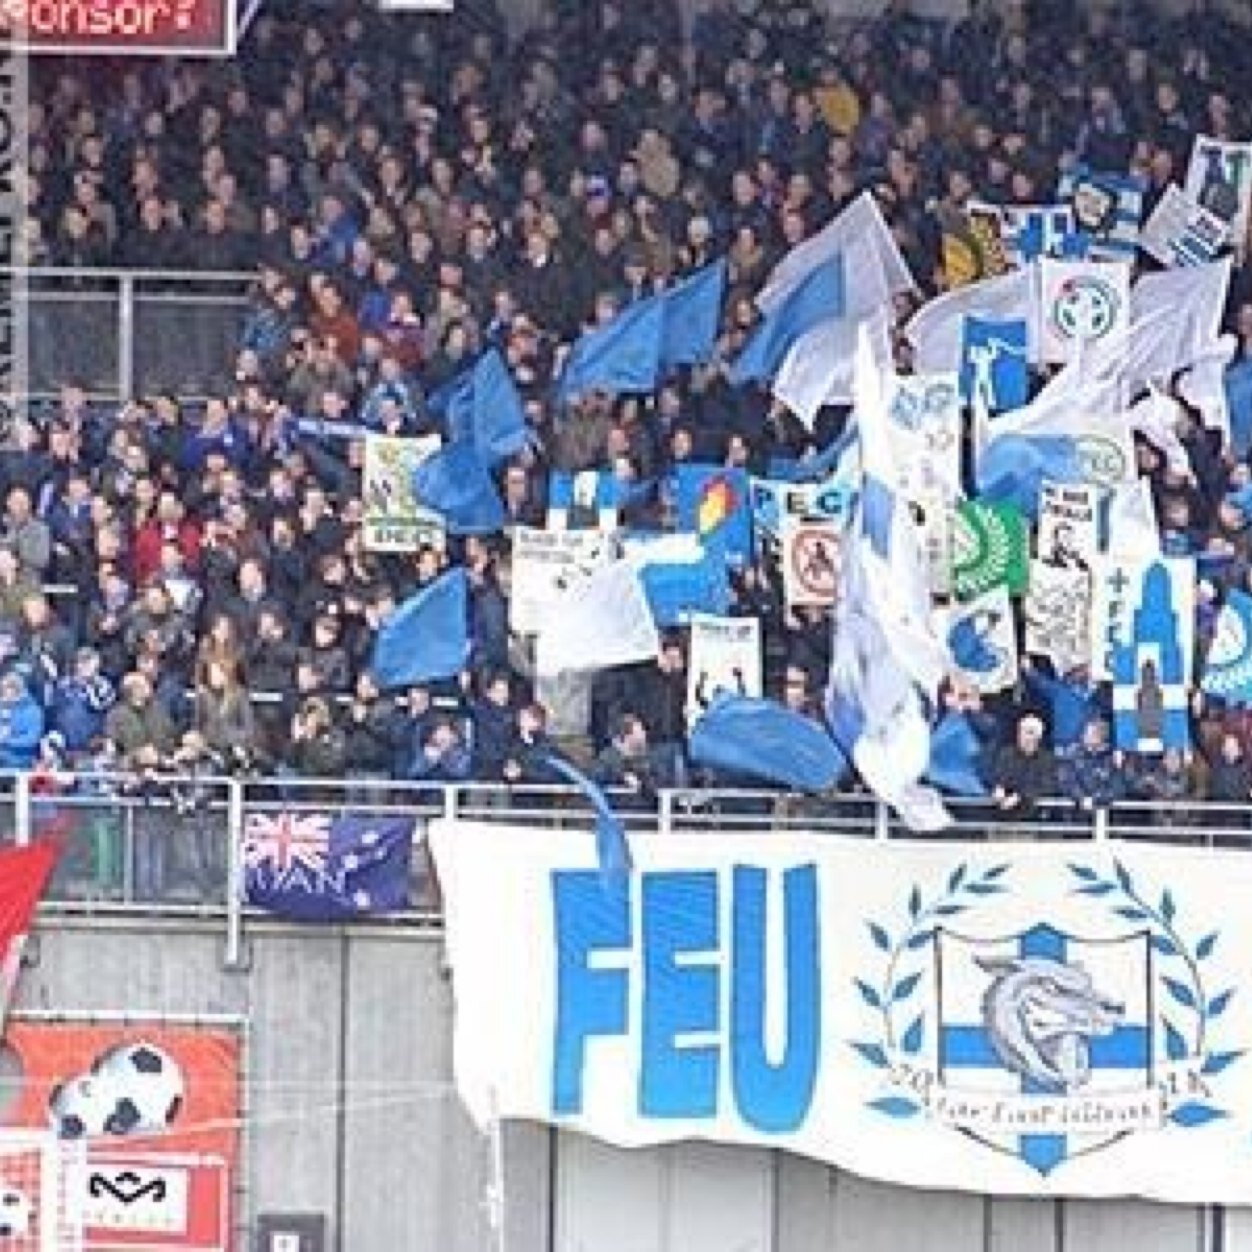 proud to be a zwollenaar, pec zwolle #038 zwolle till we die ! blue and white heart